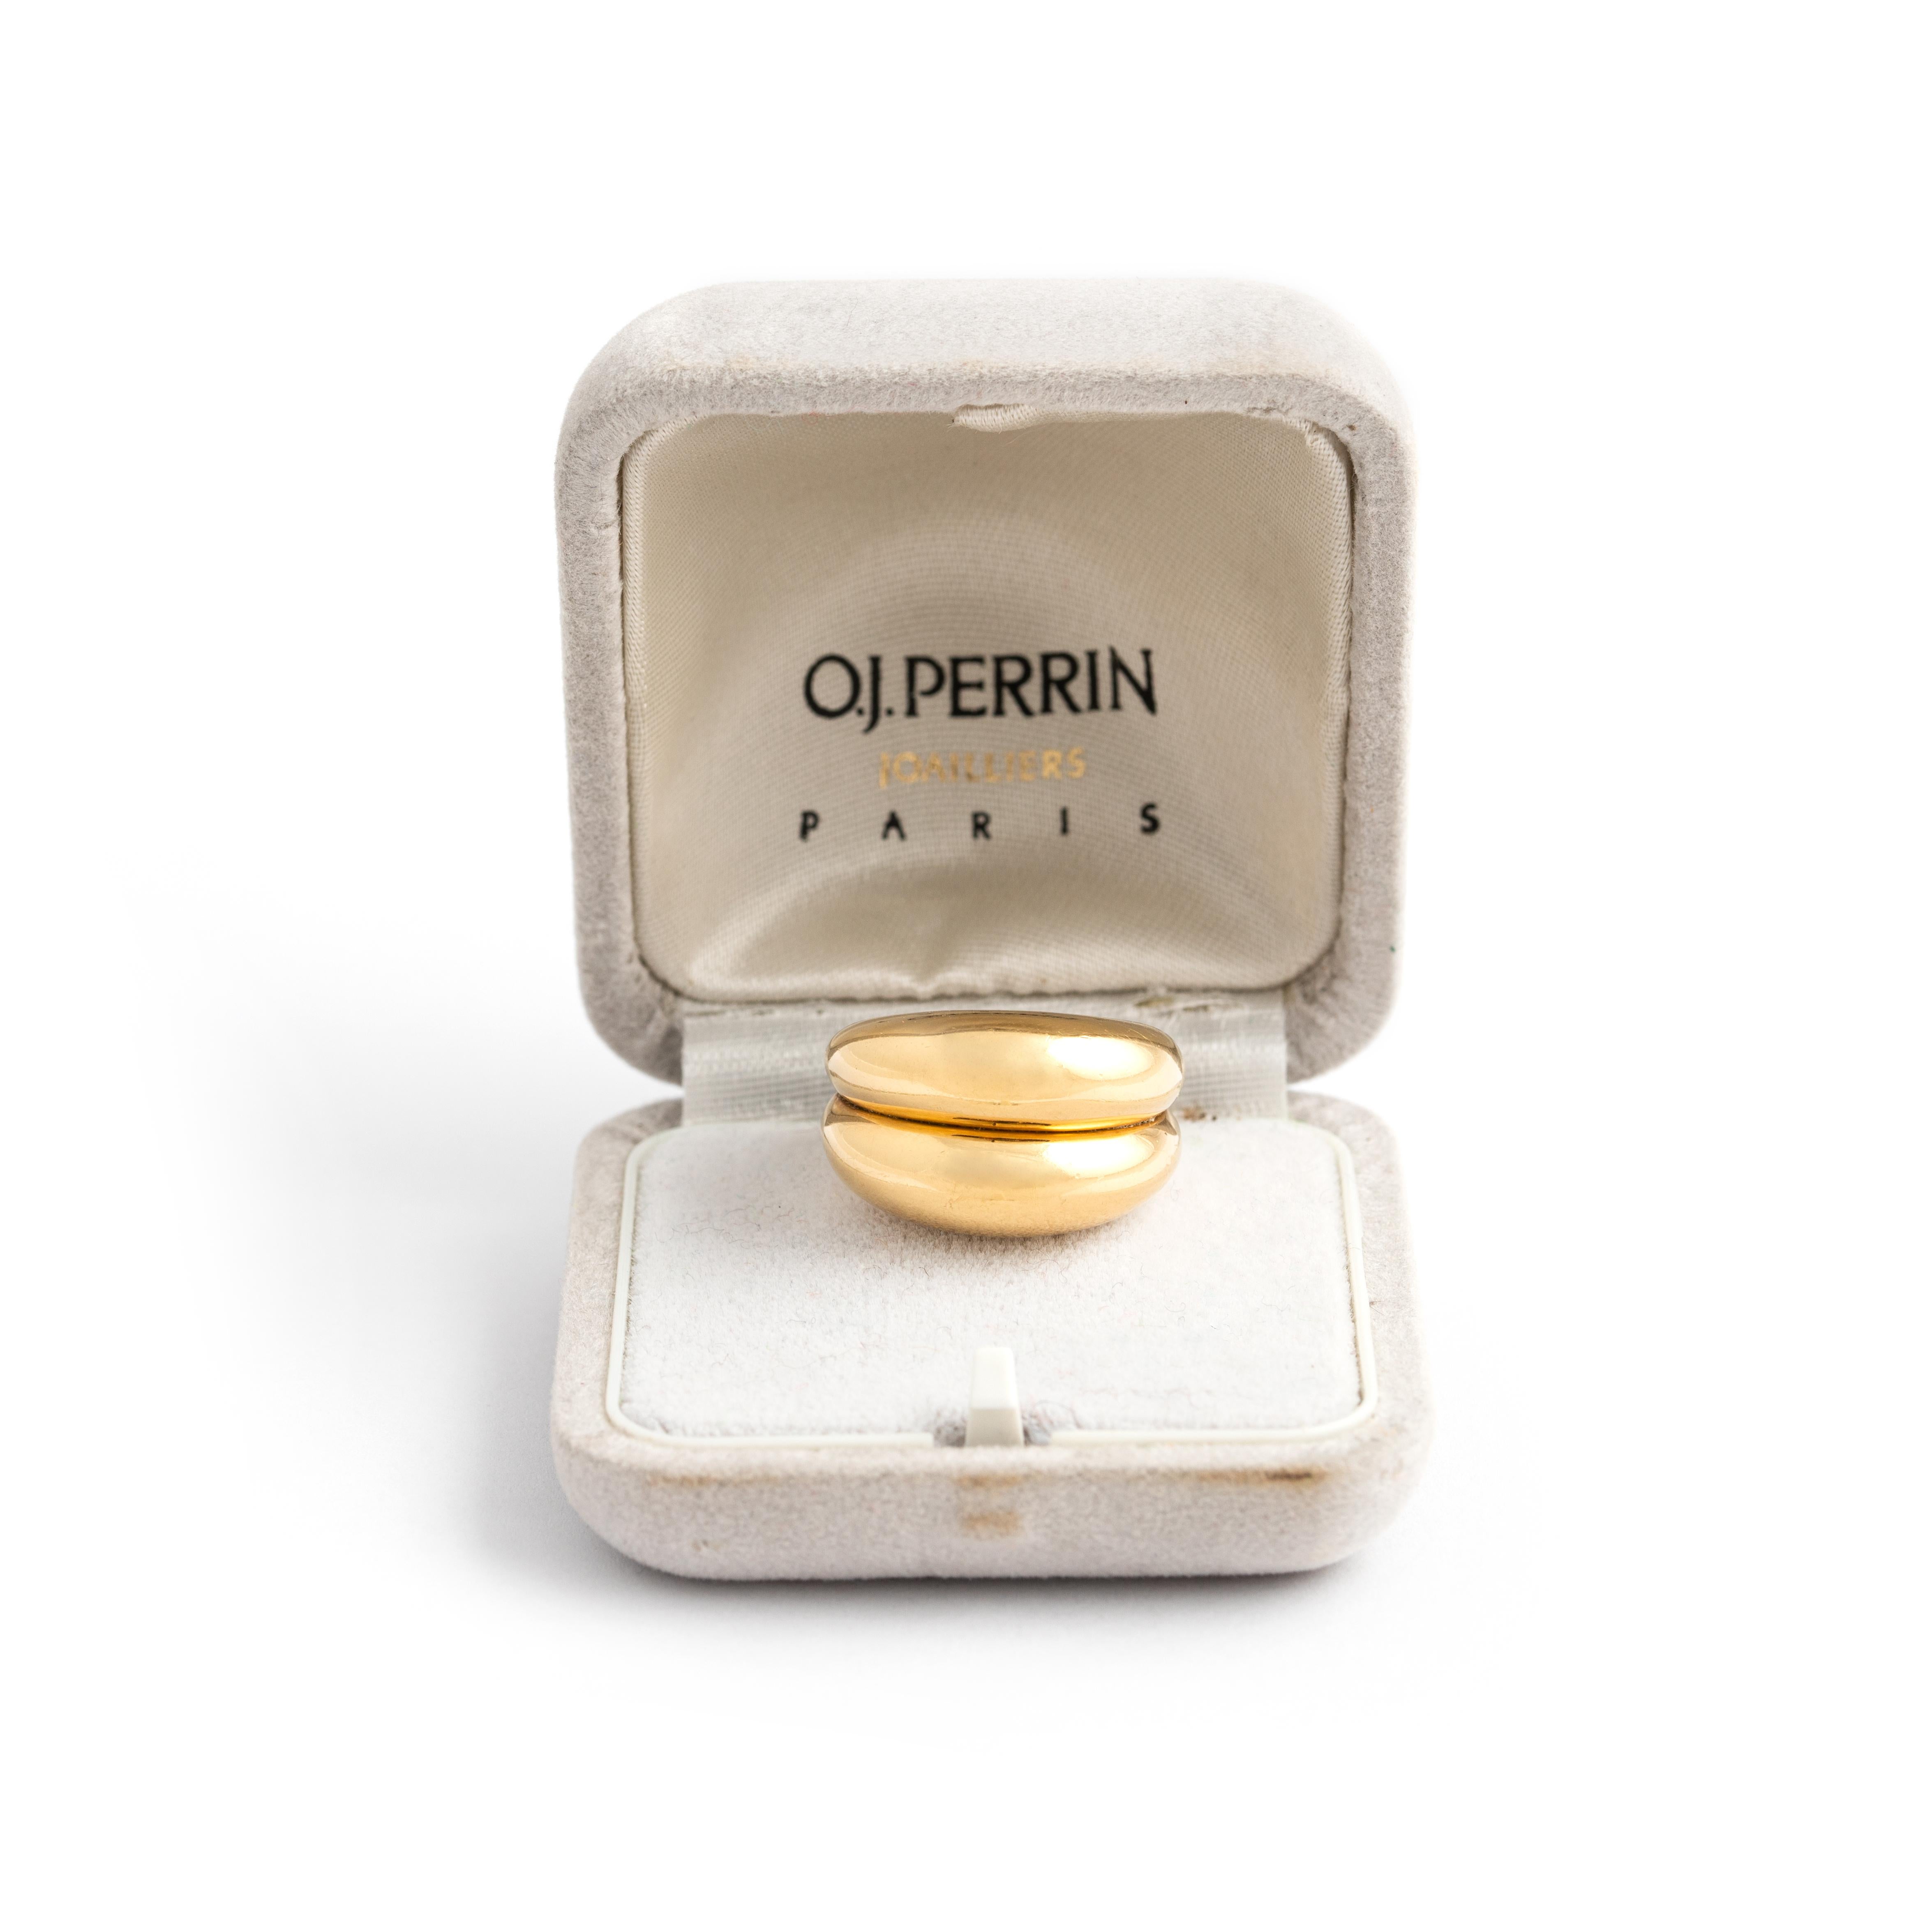 O.J. Perrin Yellow Gold 18K Ring. Collection Verona
French marks.
Signed and numbered.
Size: 54.

Original case.